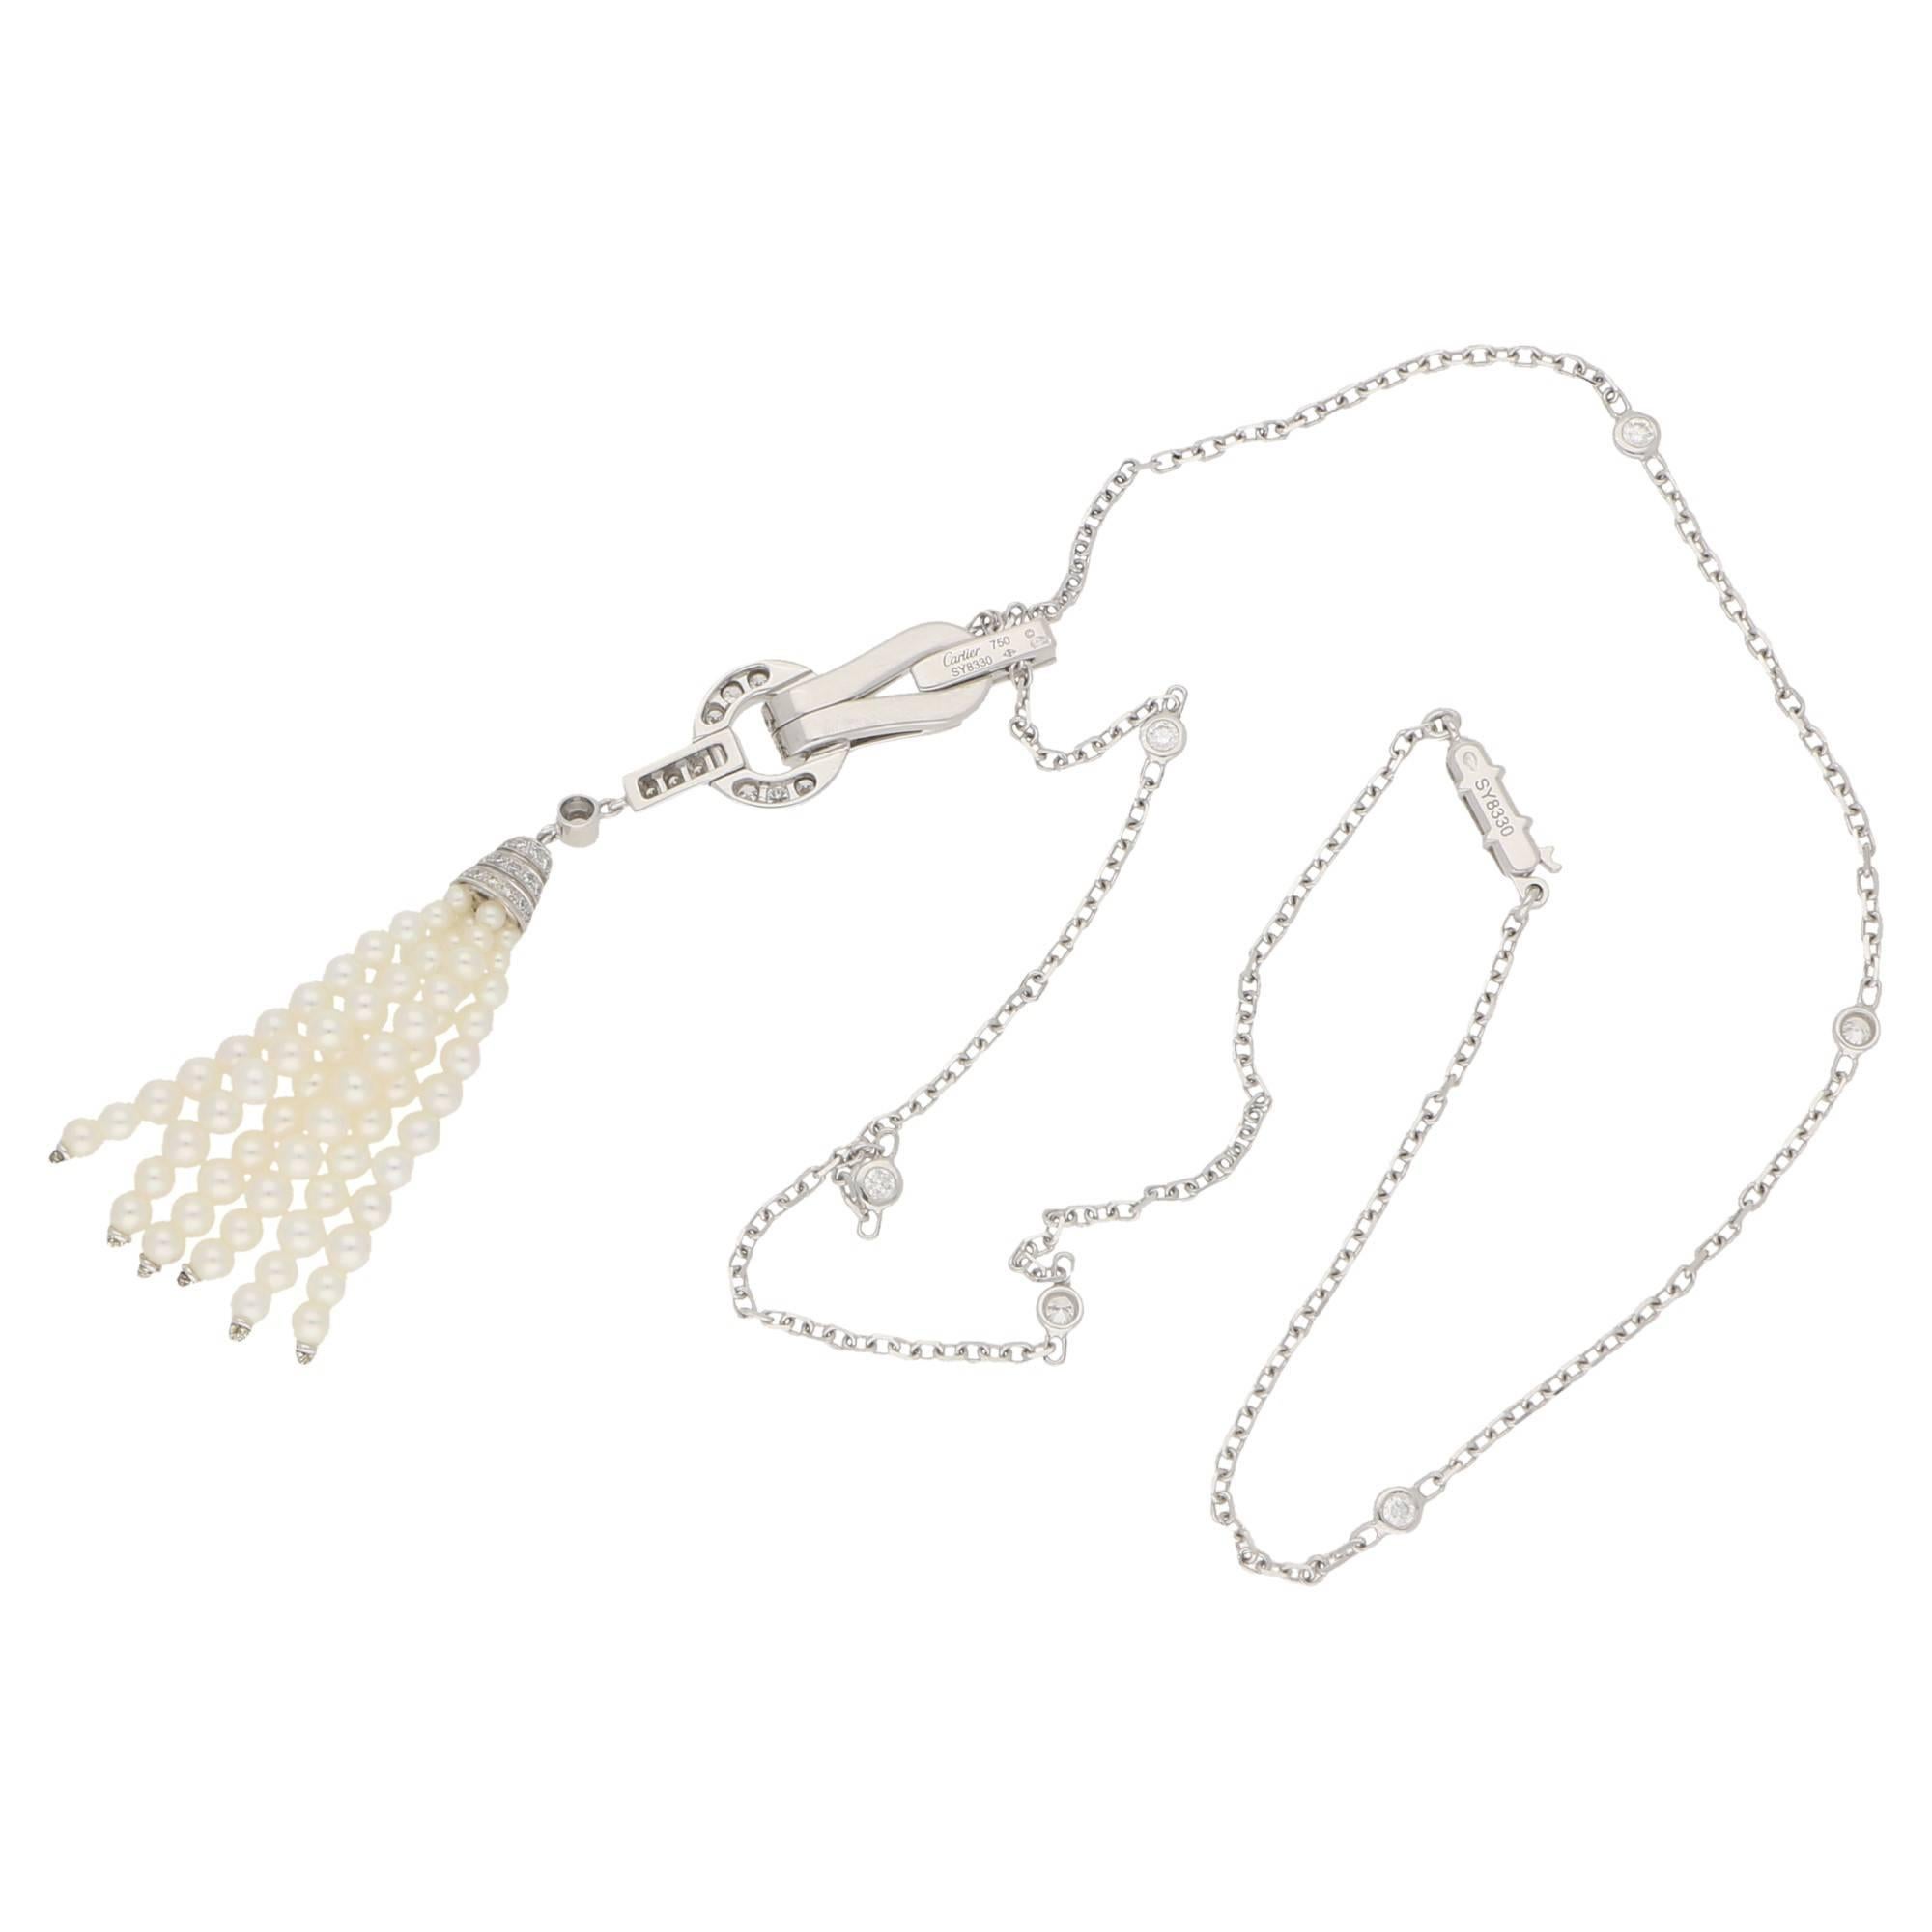 An elegant Cartier 1920's inspired diamond and pearl tassel pendant and necklace. Set in 18ct white gold the Art Deco design offers brilliant-cut diamonds totaling approximately 1.5cts atop a cultured pearl tassel drop pendant. The 18ct white gold